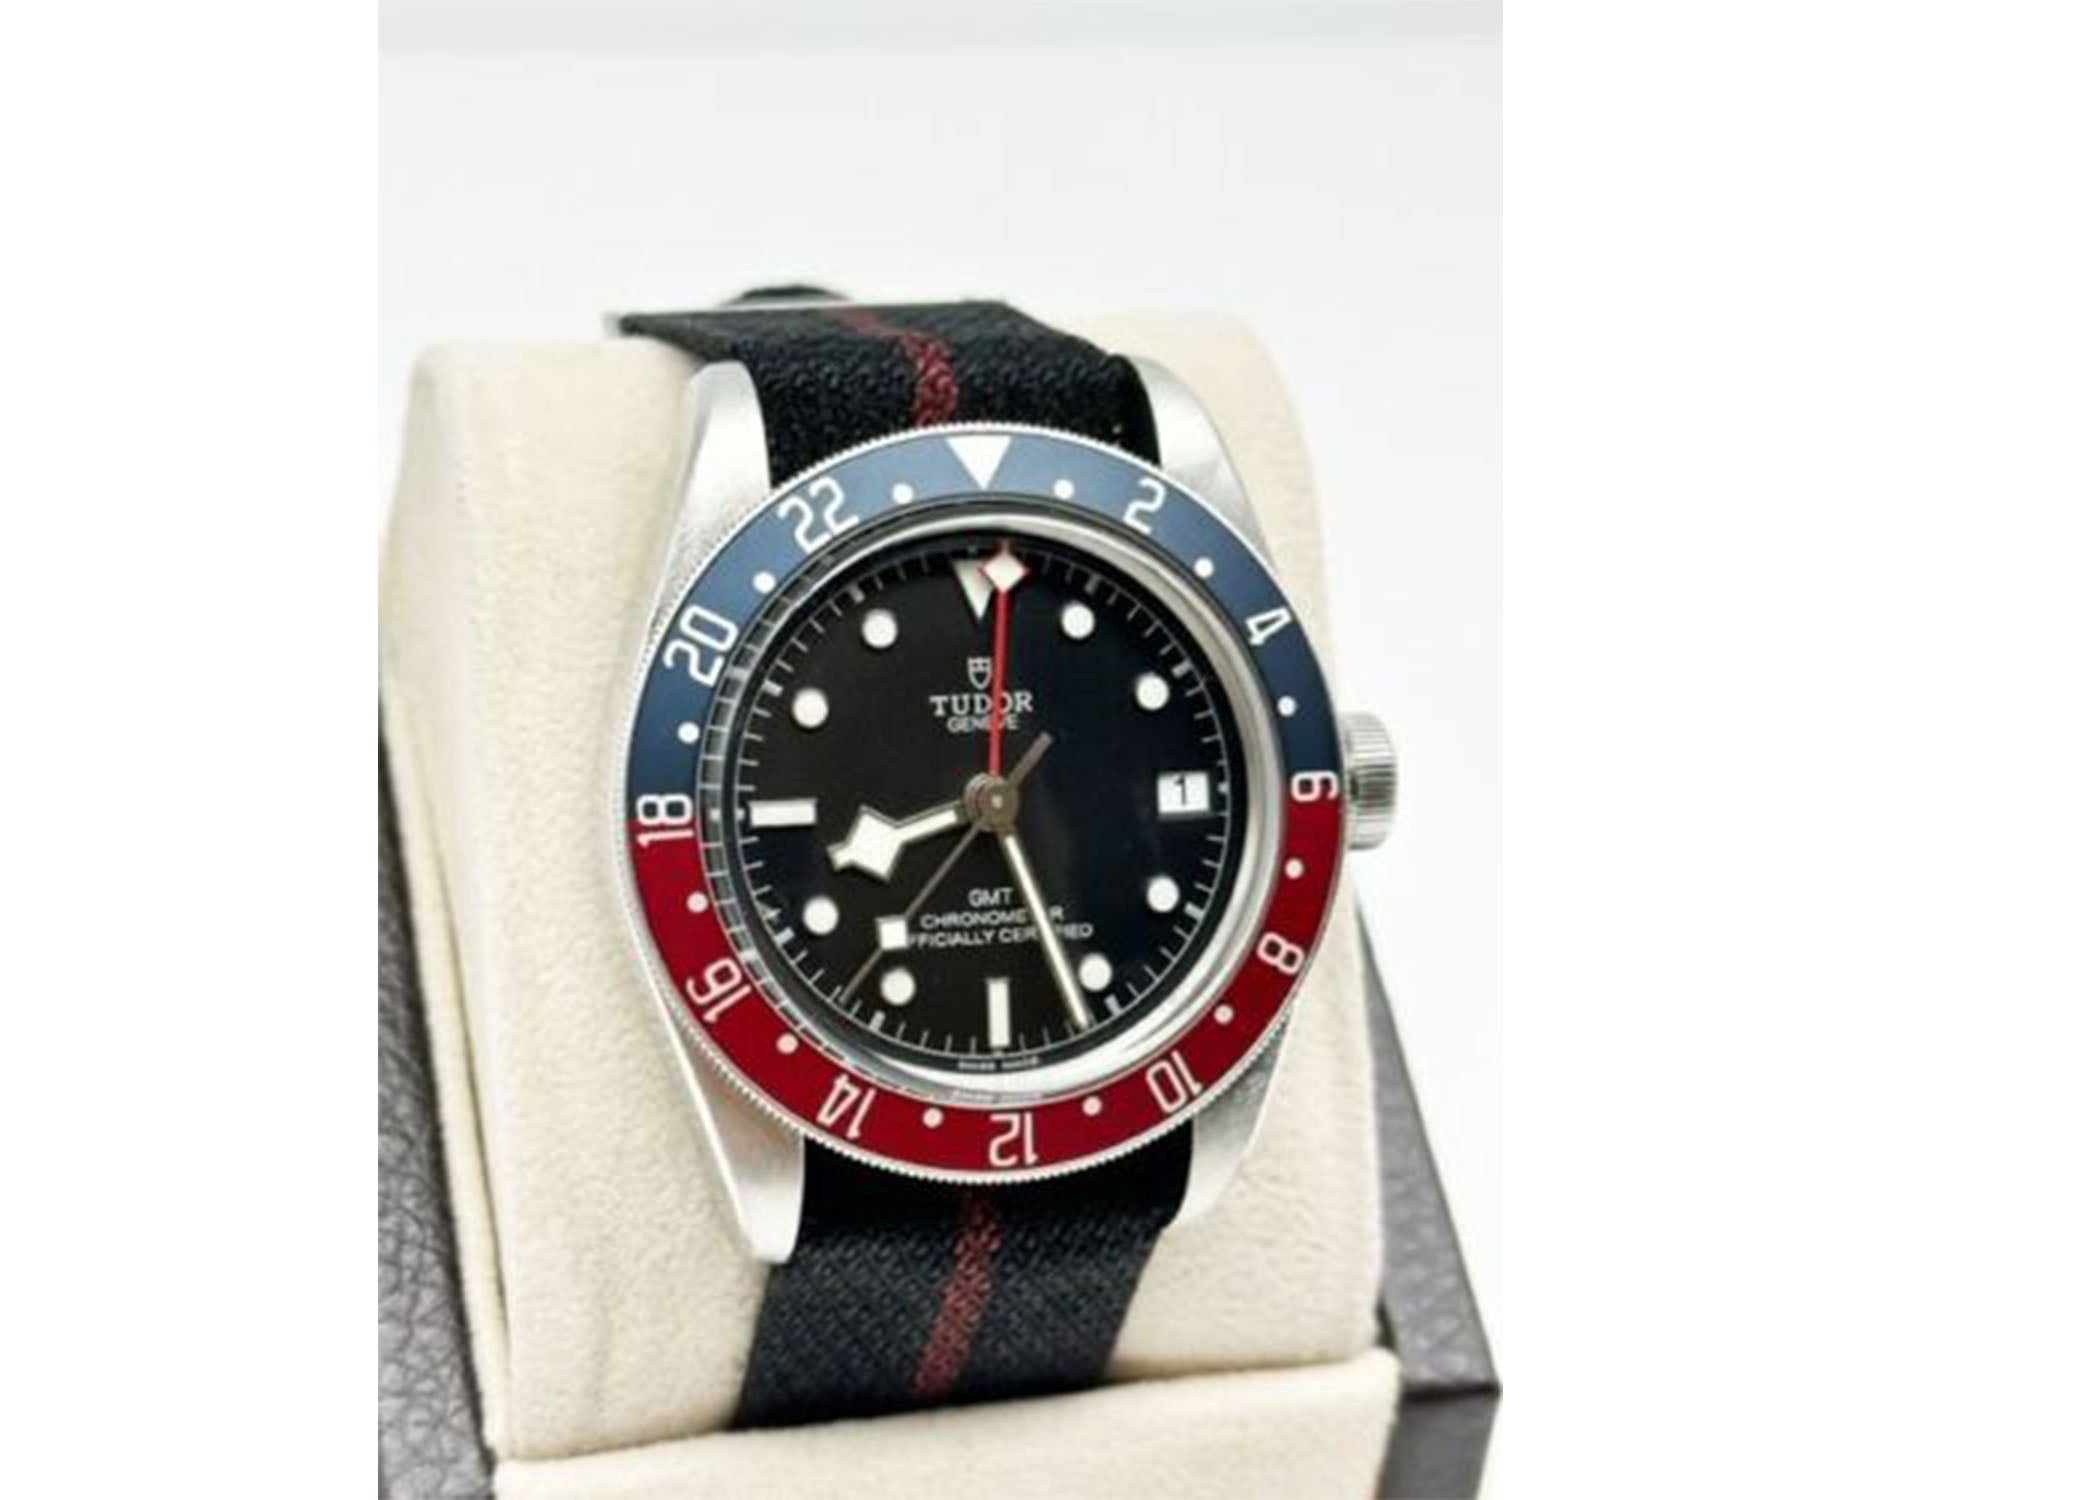 Style Number: 79830 
Serial: 9187***
Year: 2022
Model: Black Bay GMT
Case Material: Stainless Steel 
Band: Fabric
Bezel: Pepsi
Dial: Black
Face: Sapphire Crystal 
Case Size: 41mm 

Includes: 

-Tudor Box & Paper

-Certified Appraisal 

-5 Year